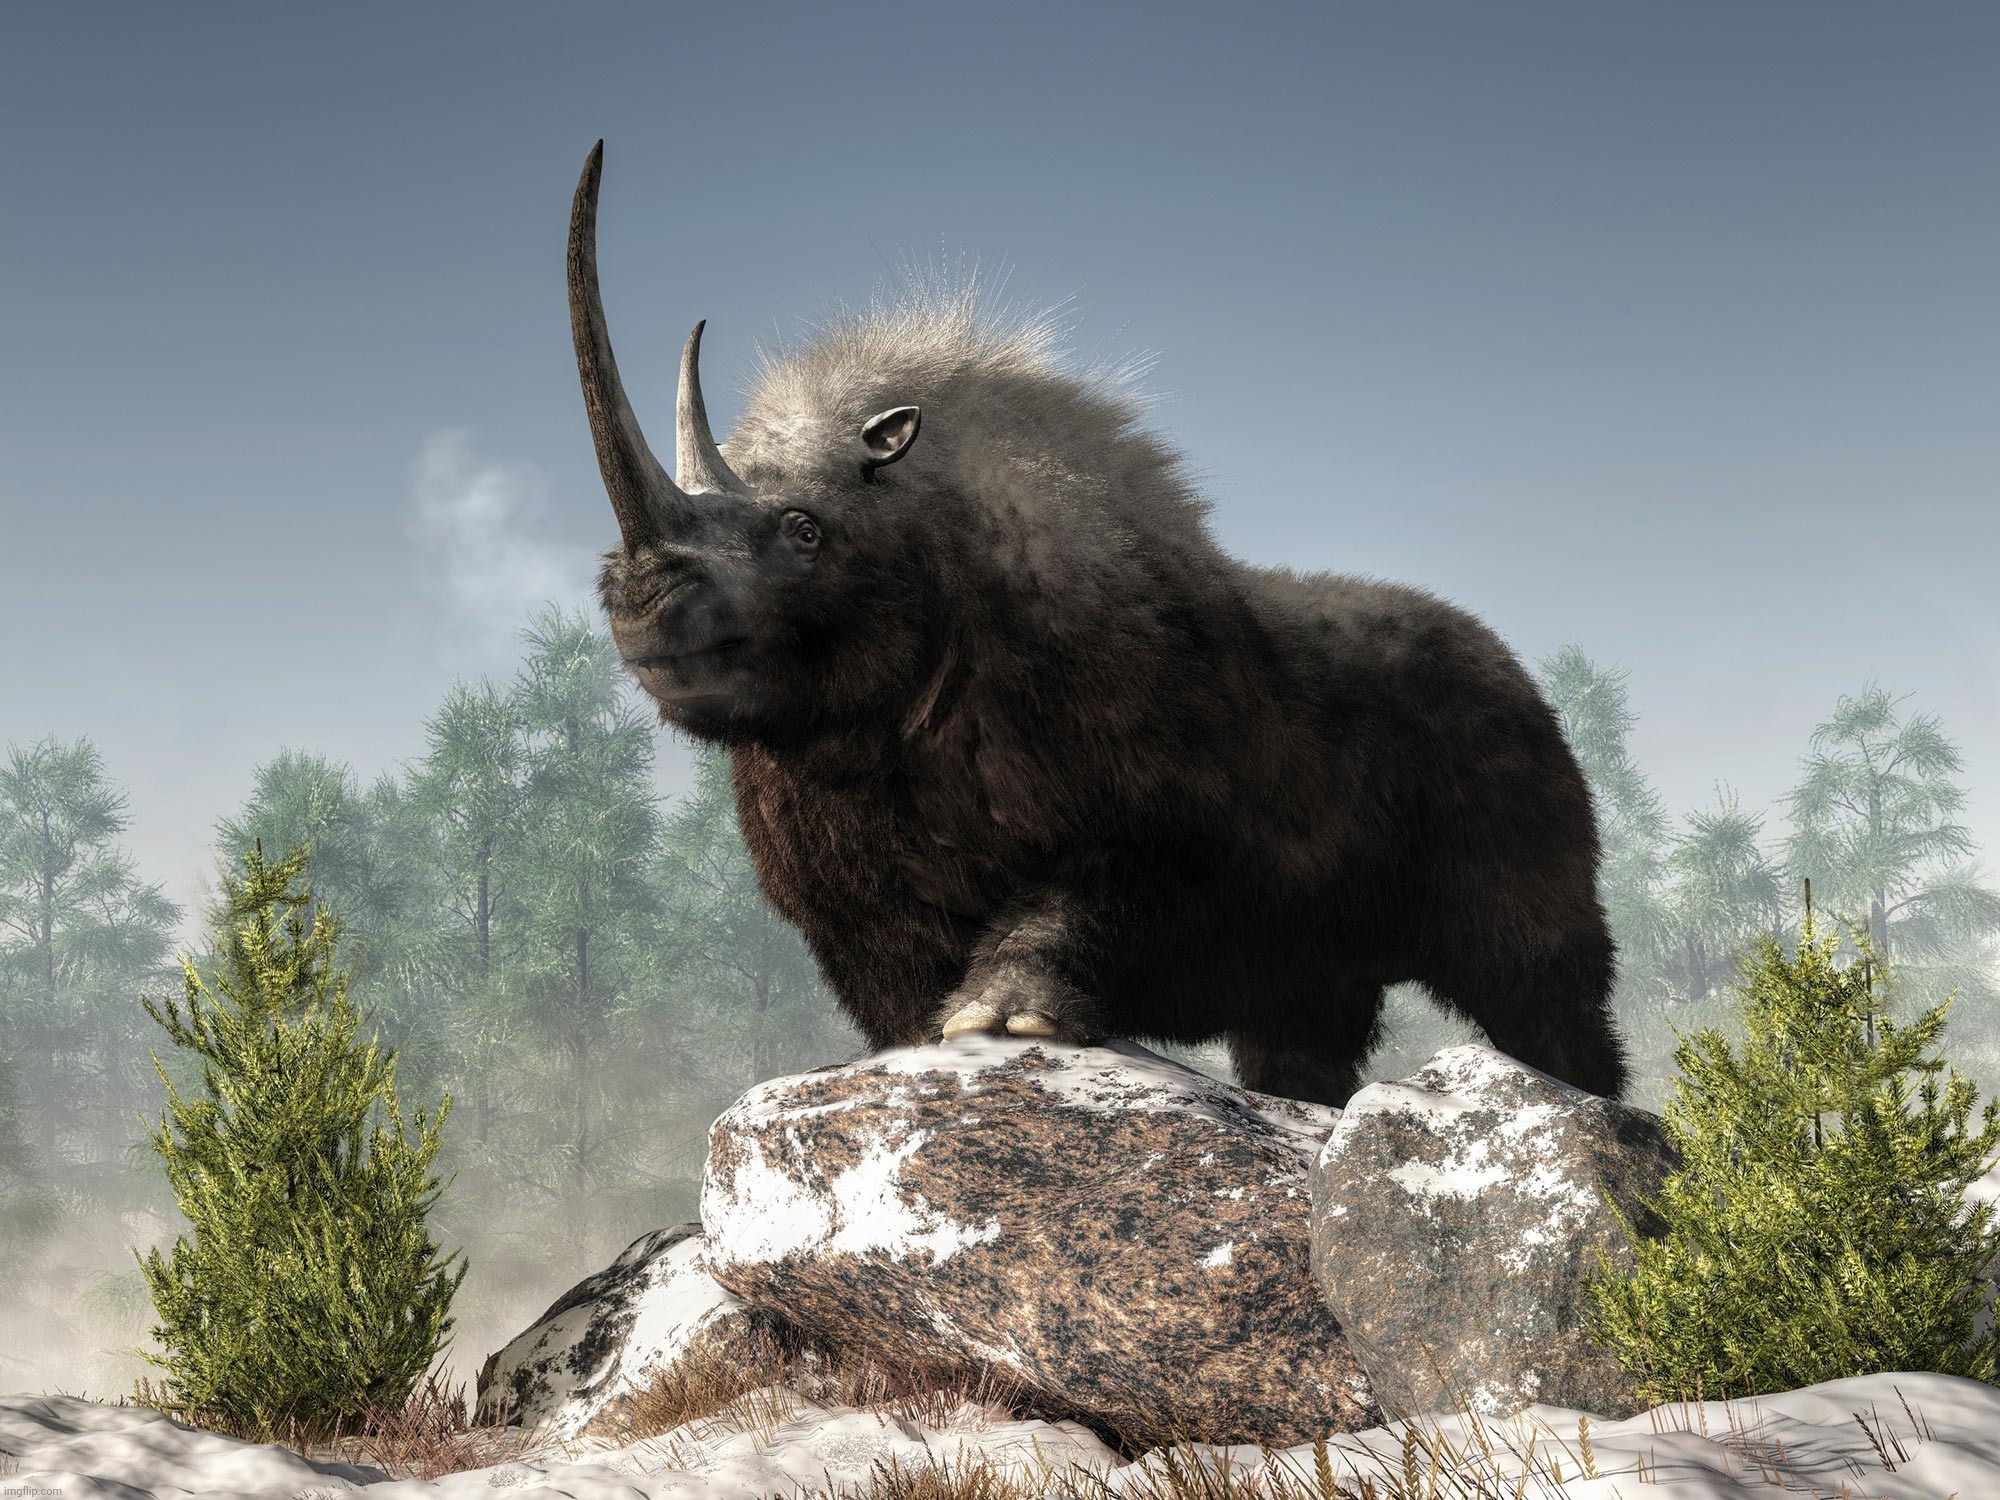 More recent evidence suggests the Woolly rhino was still alive in Siberia as recently as 9800 years ago | made w/ Imgflip meme maker